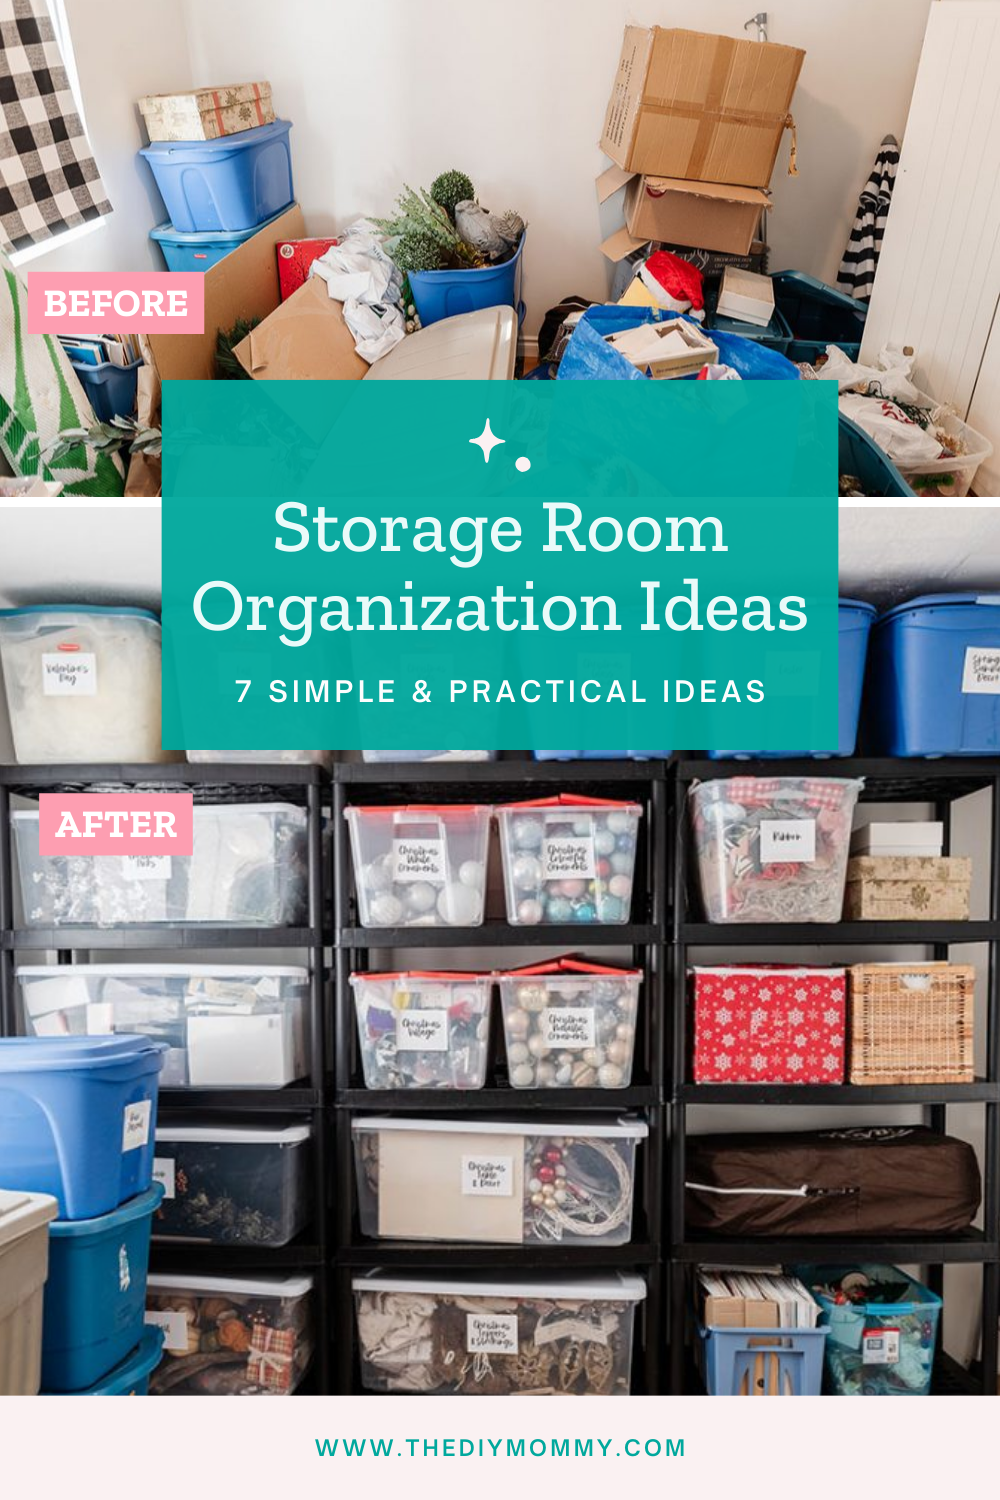 https://thediymommy.com/wp-content/uploads/2021/01/Storage-room-organization.png